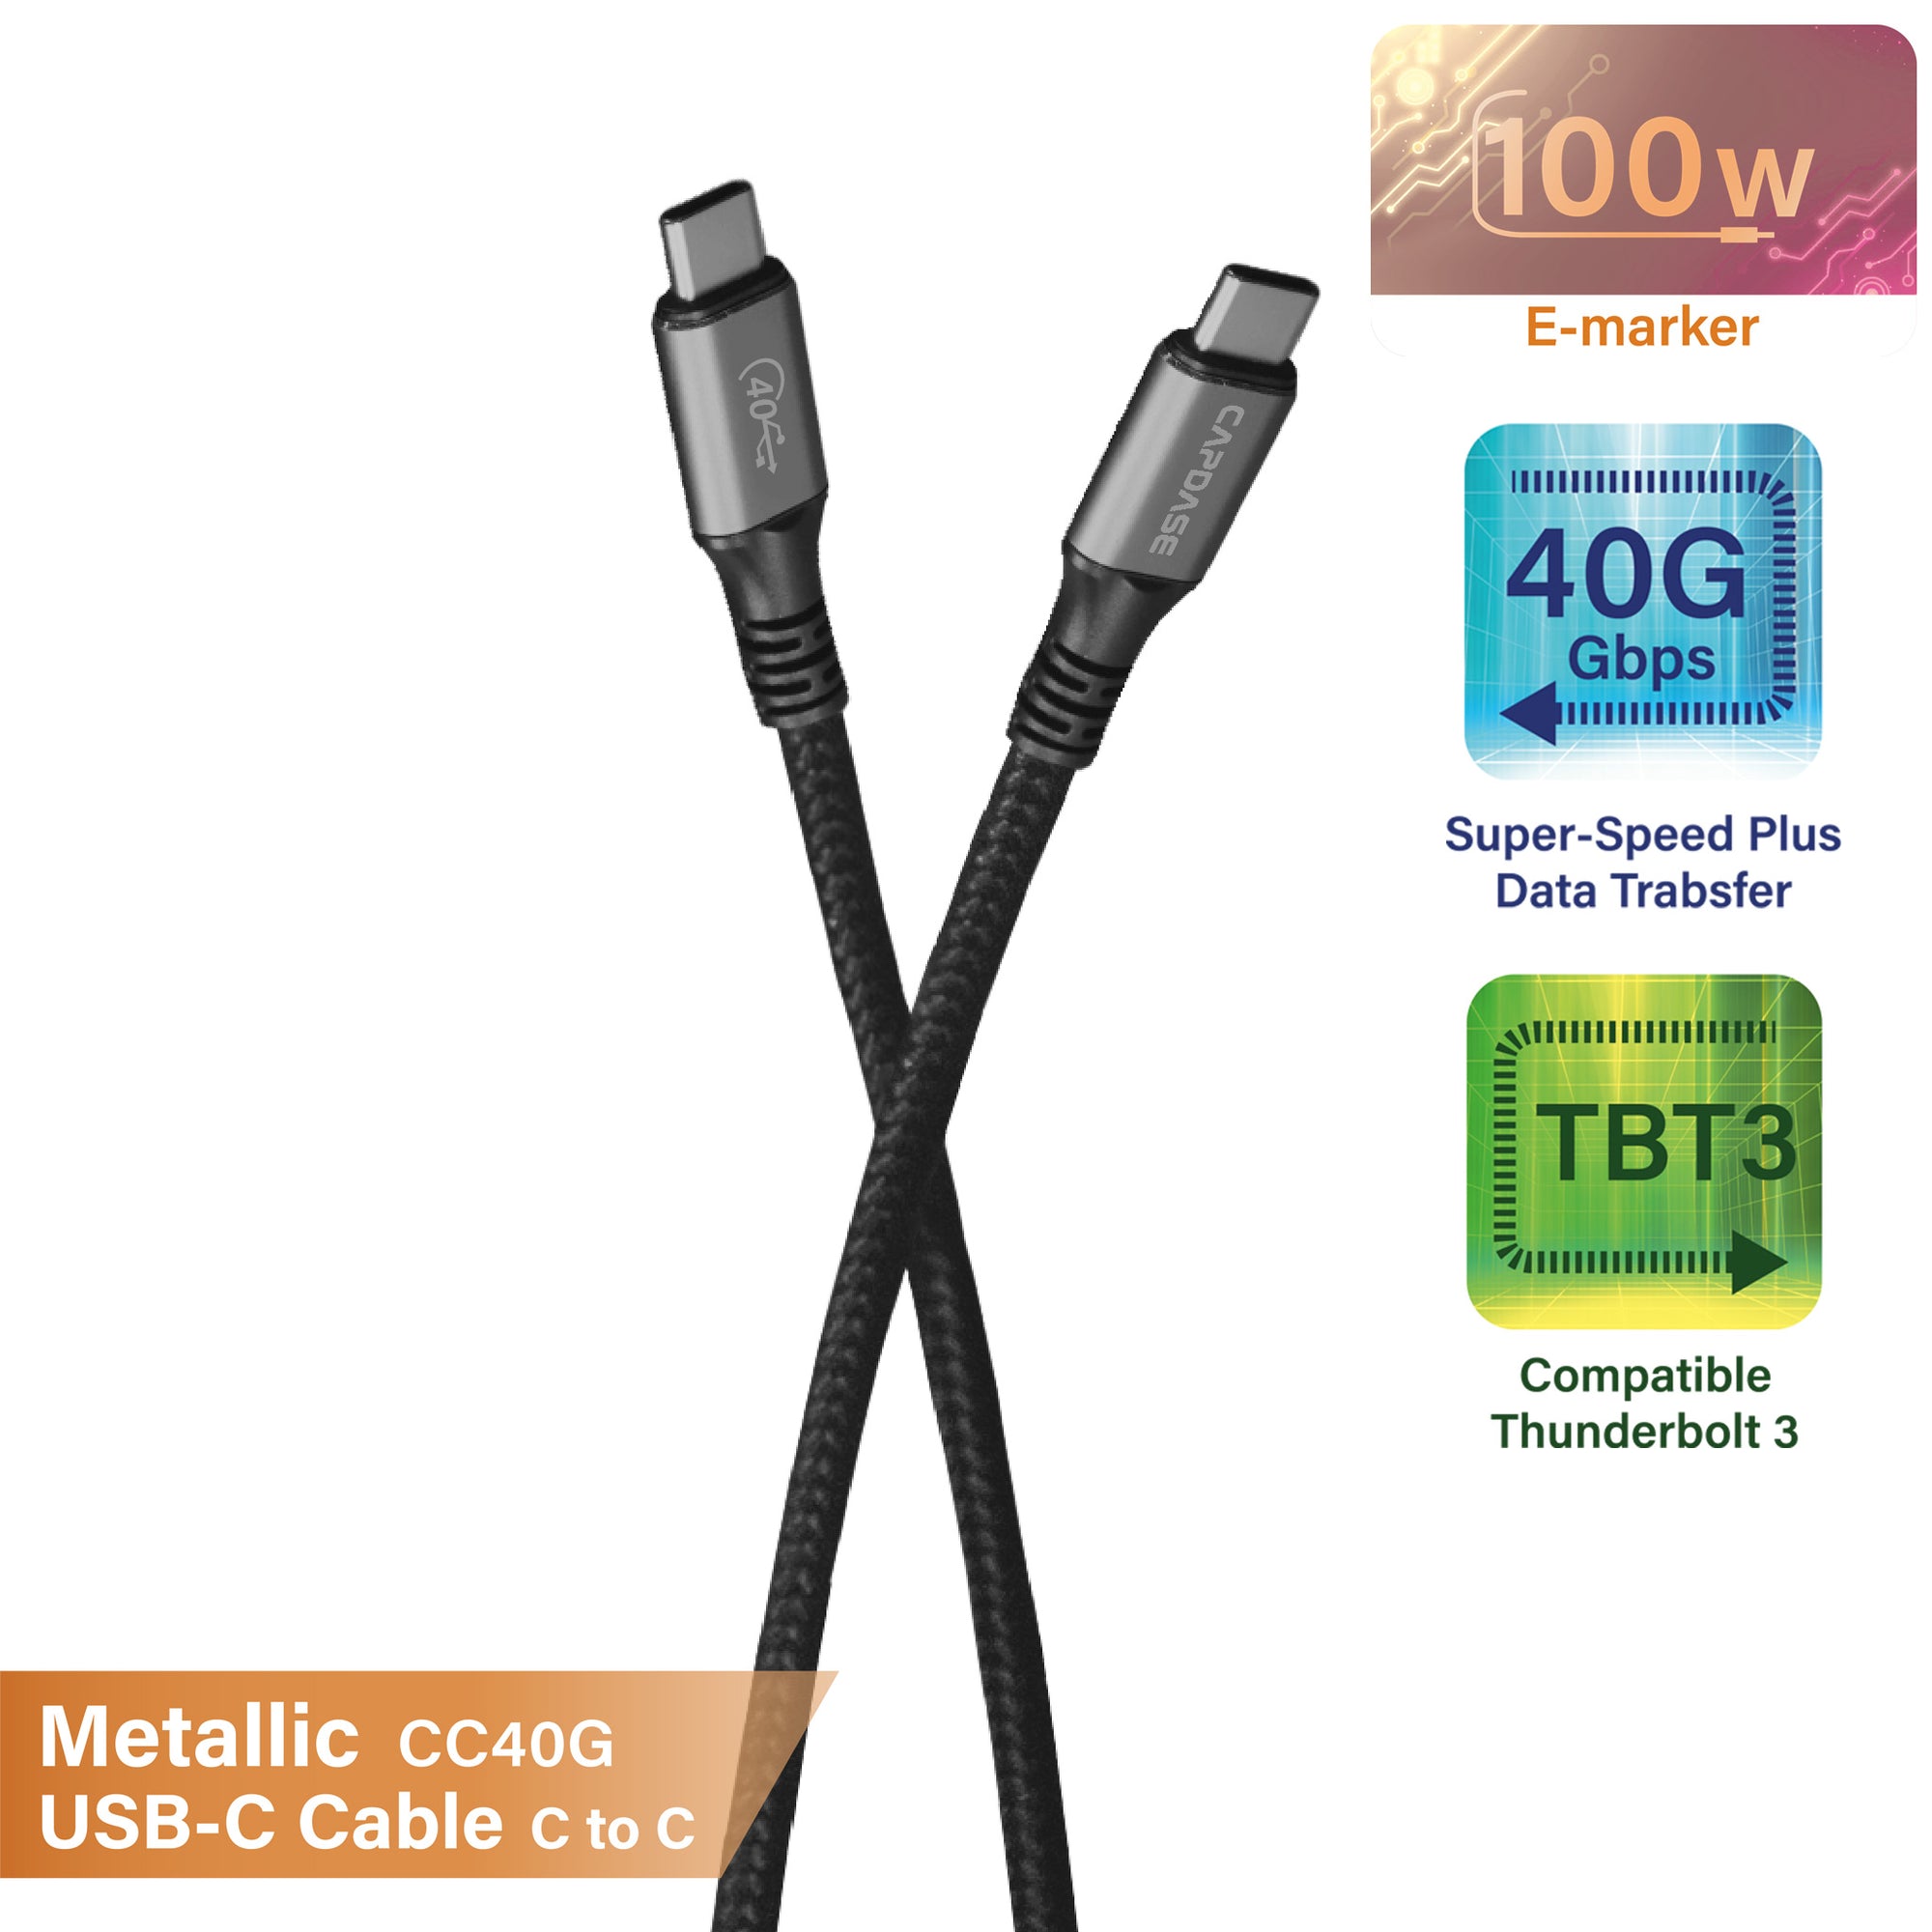 METALLIC CC40G USB-C To USB-C 8K 40G 100W USB 4.0 Sync and Charge Cable 1.2M